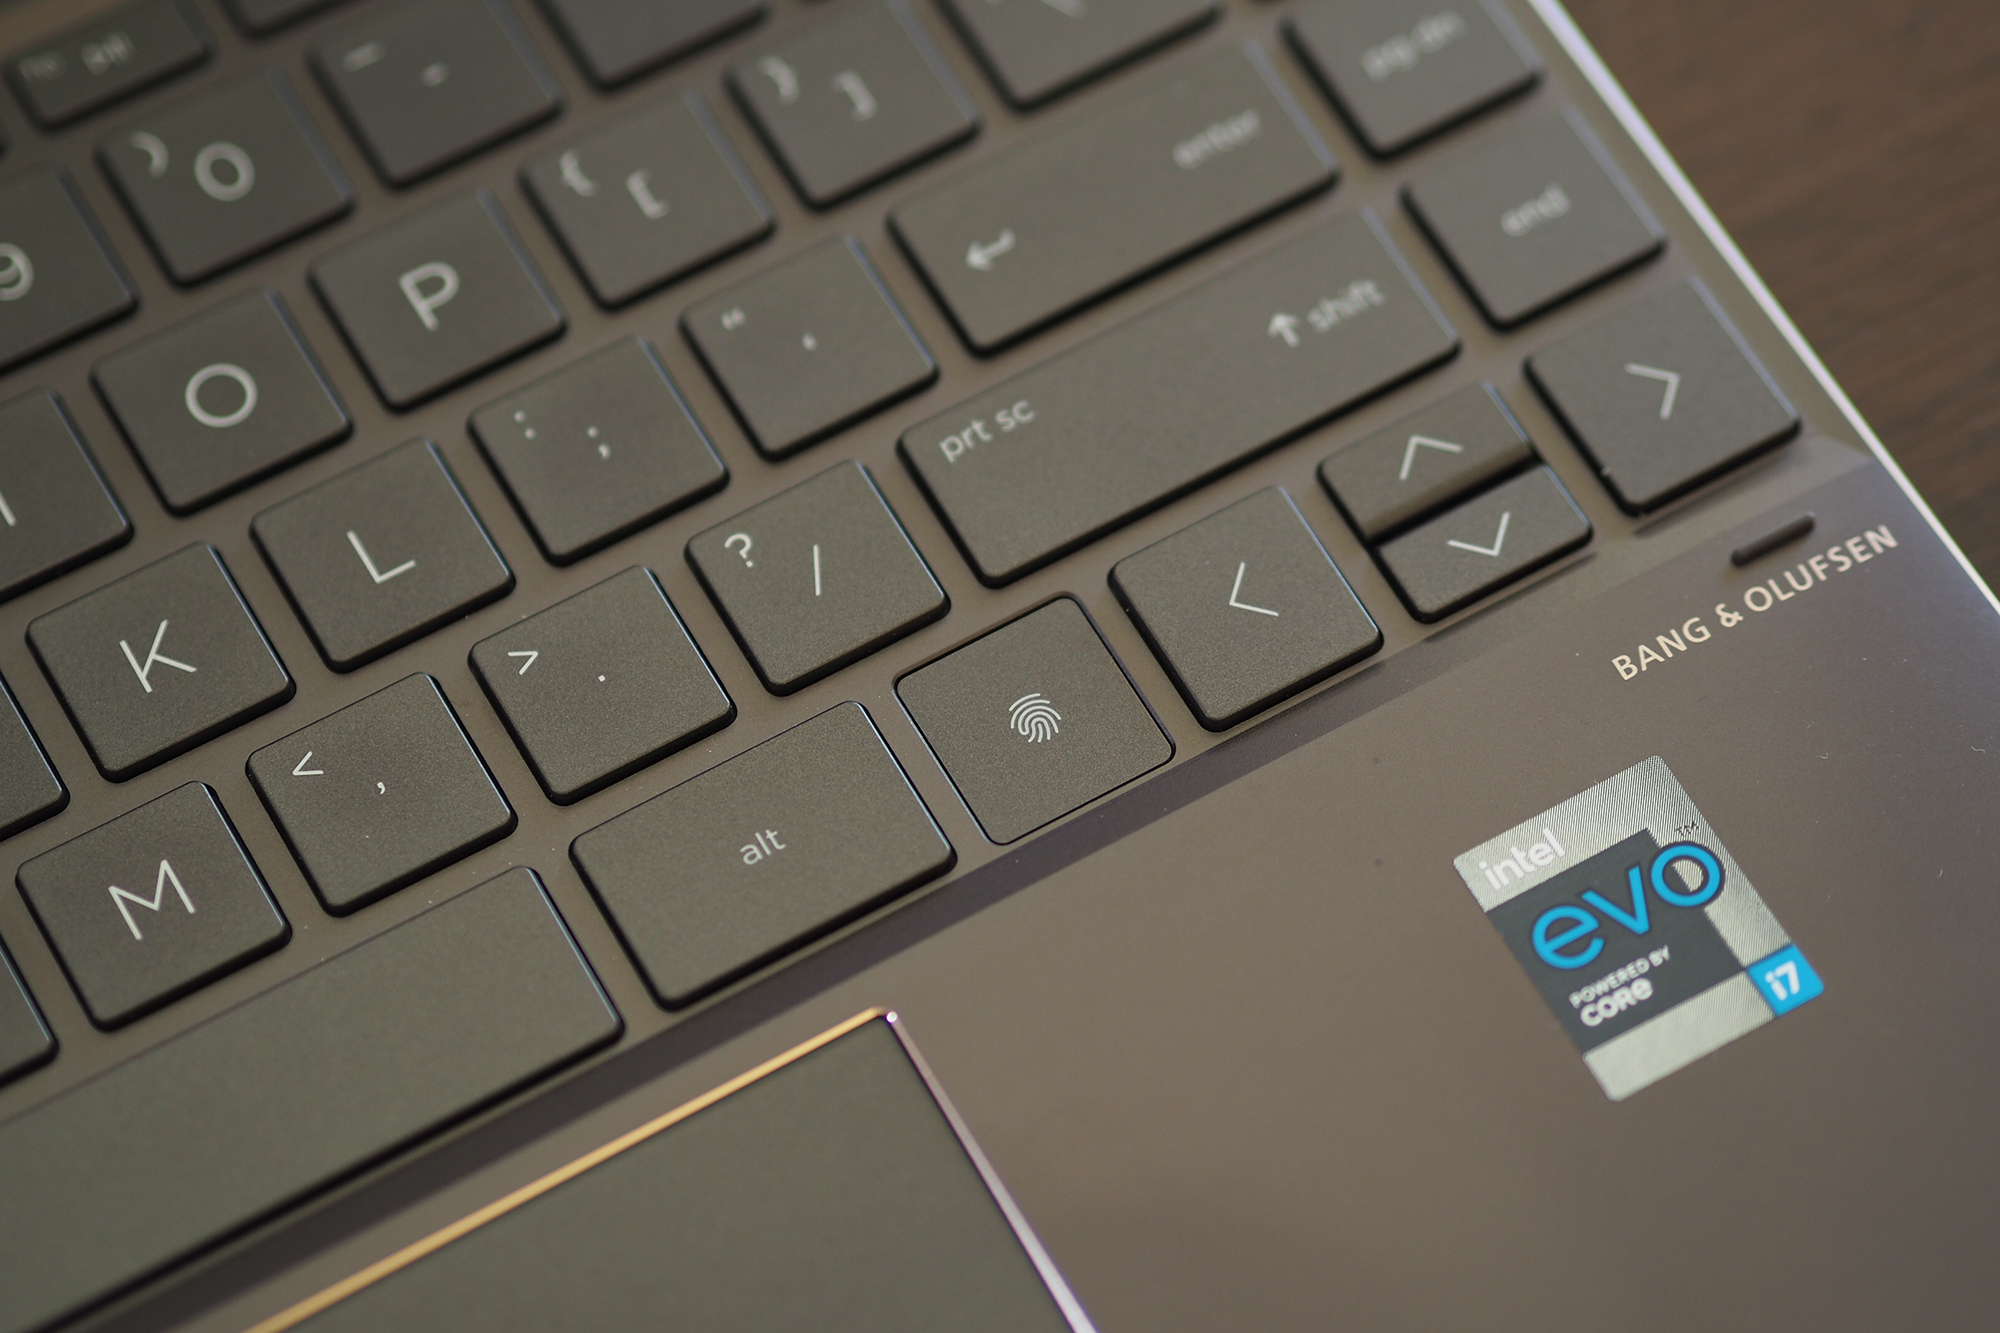 HP Spectre x360 14 review: Exquisite design, blistering performance